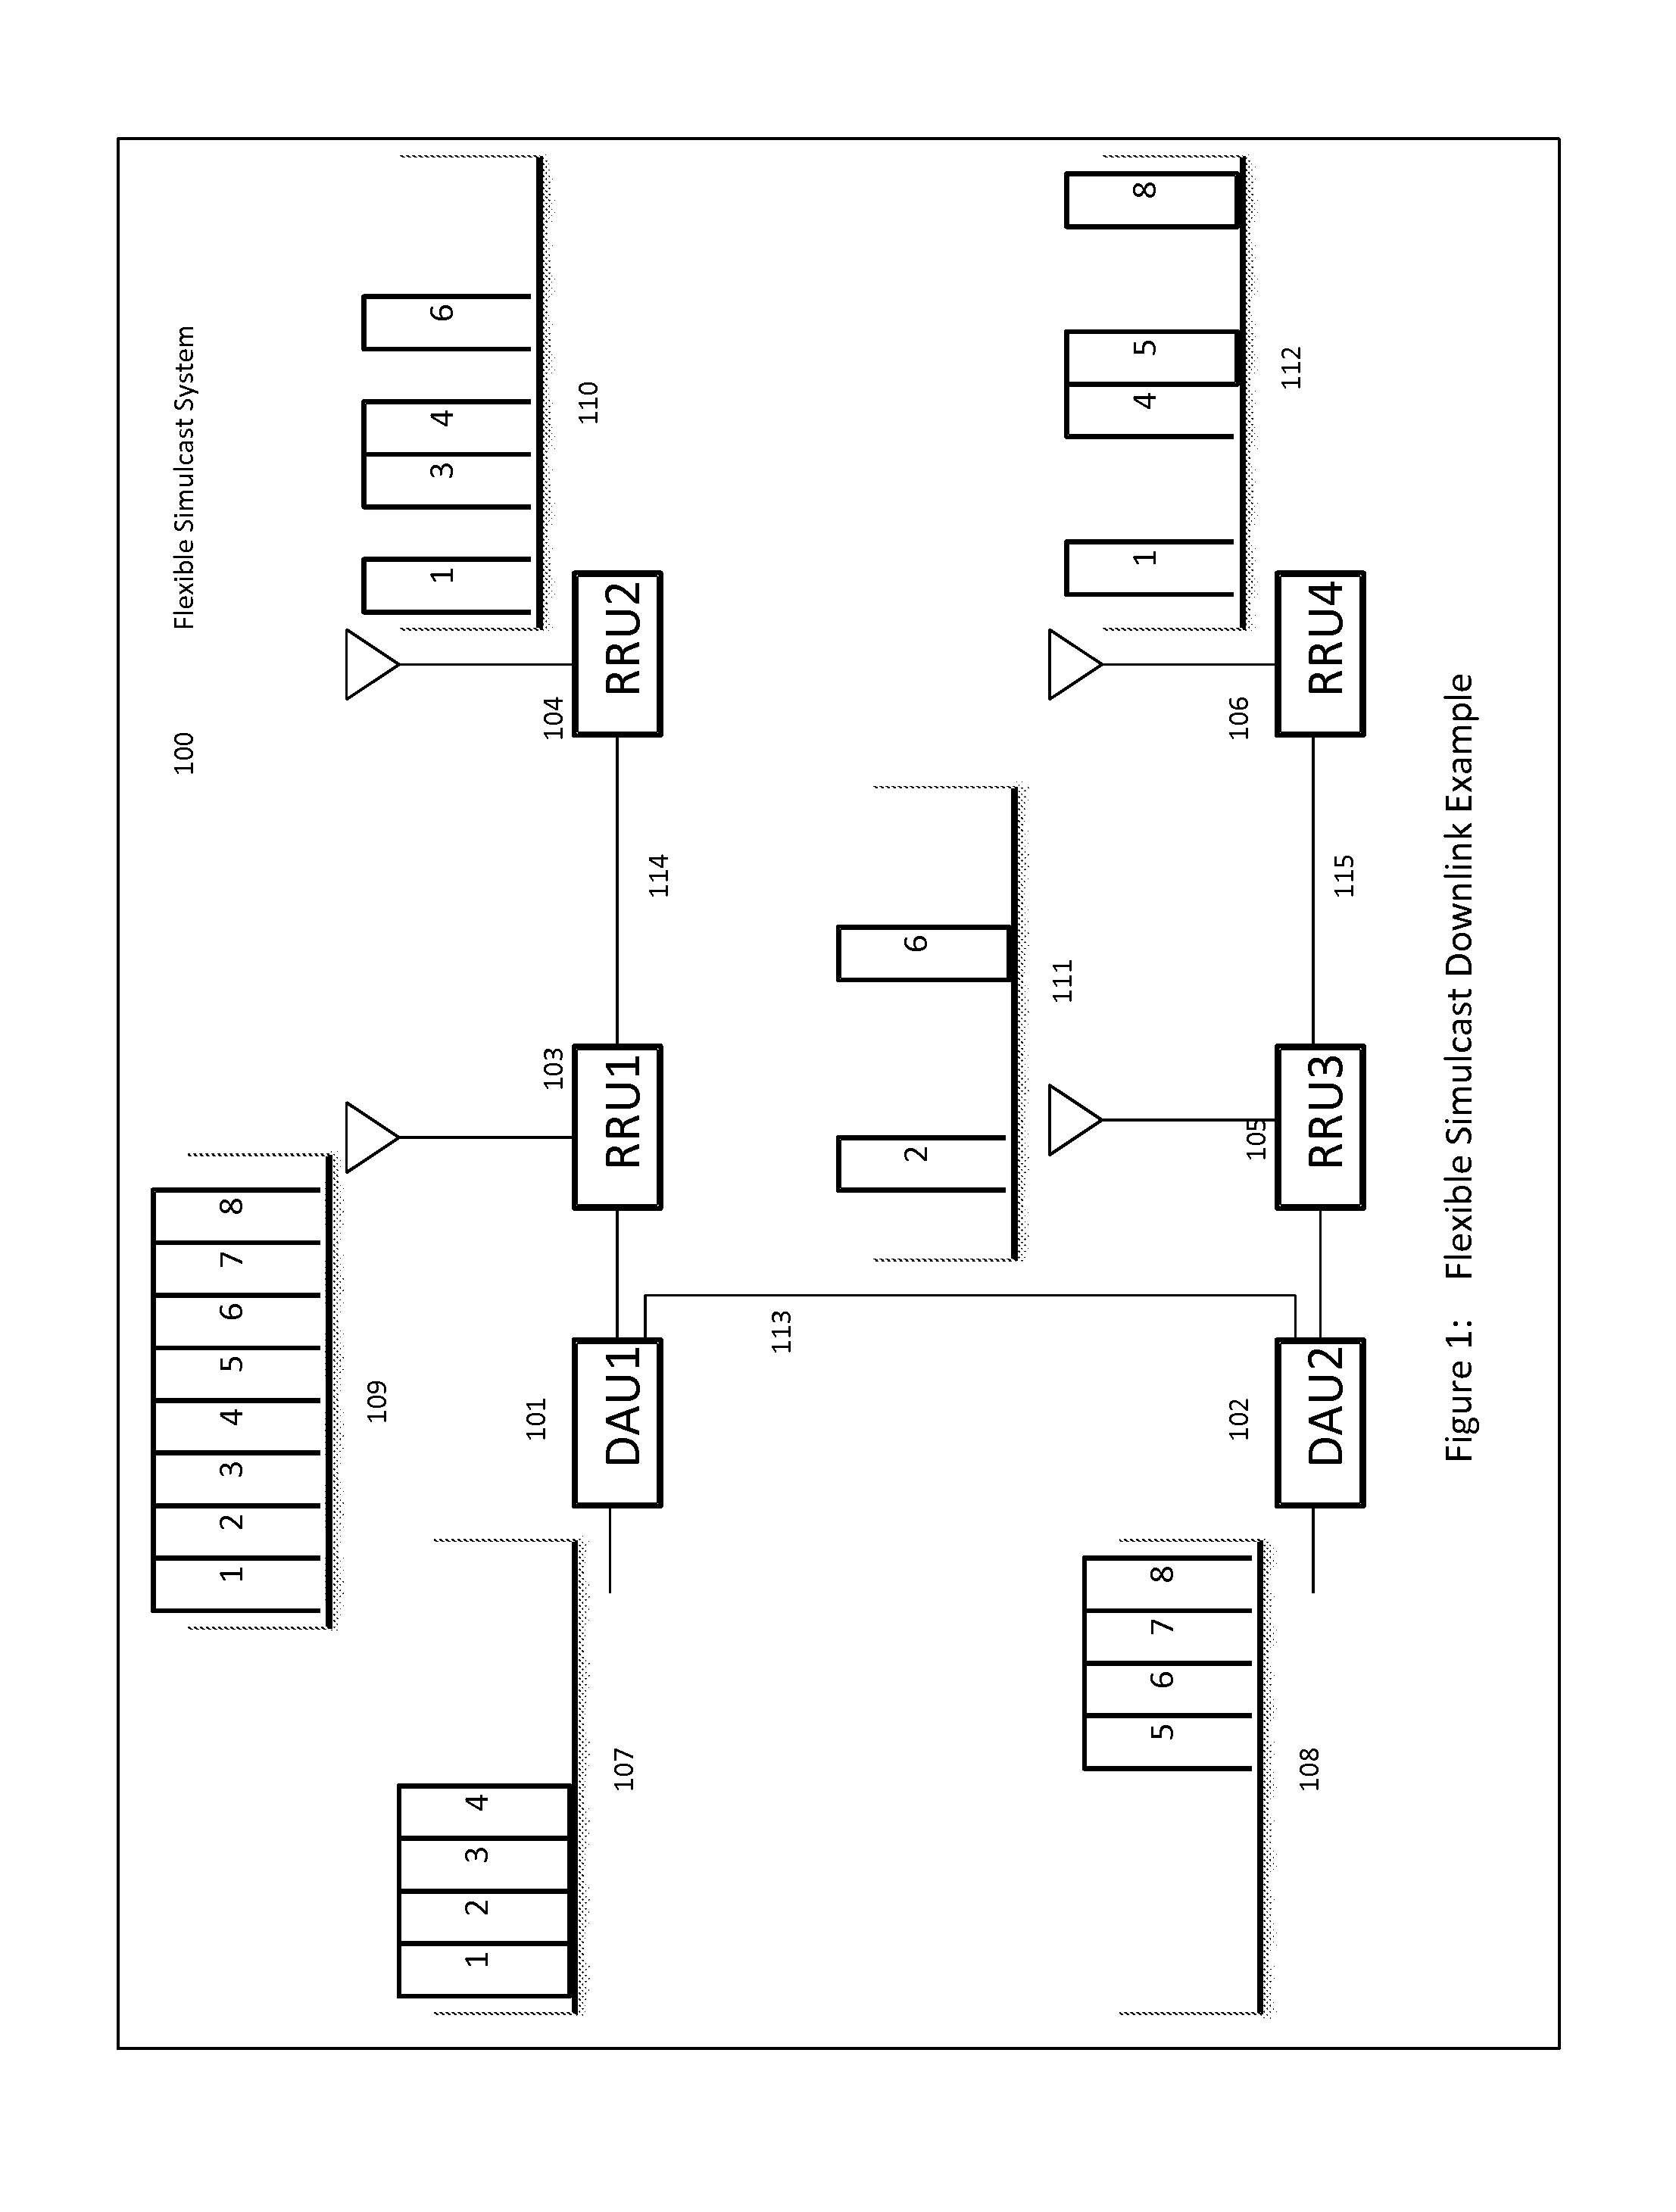 Remotely Reconfigurable Distributed Antenna System and Methods